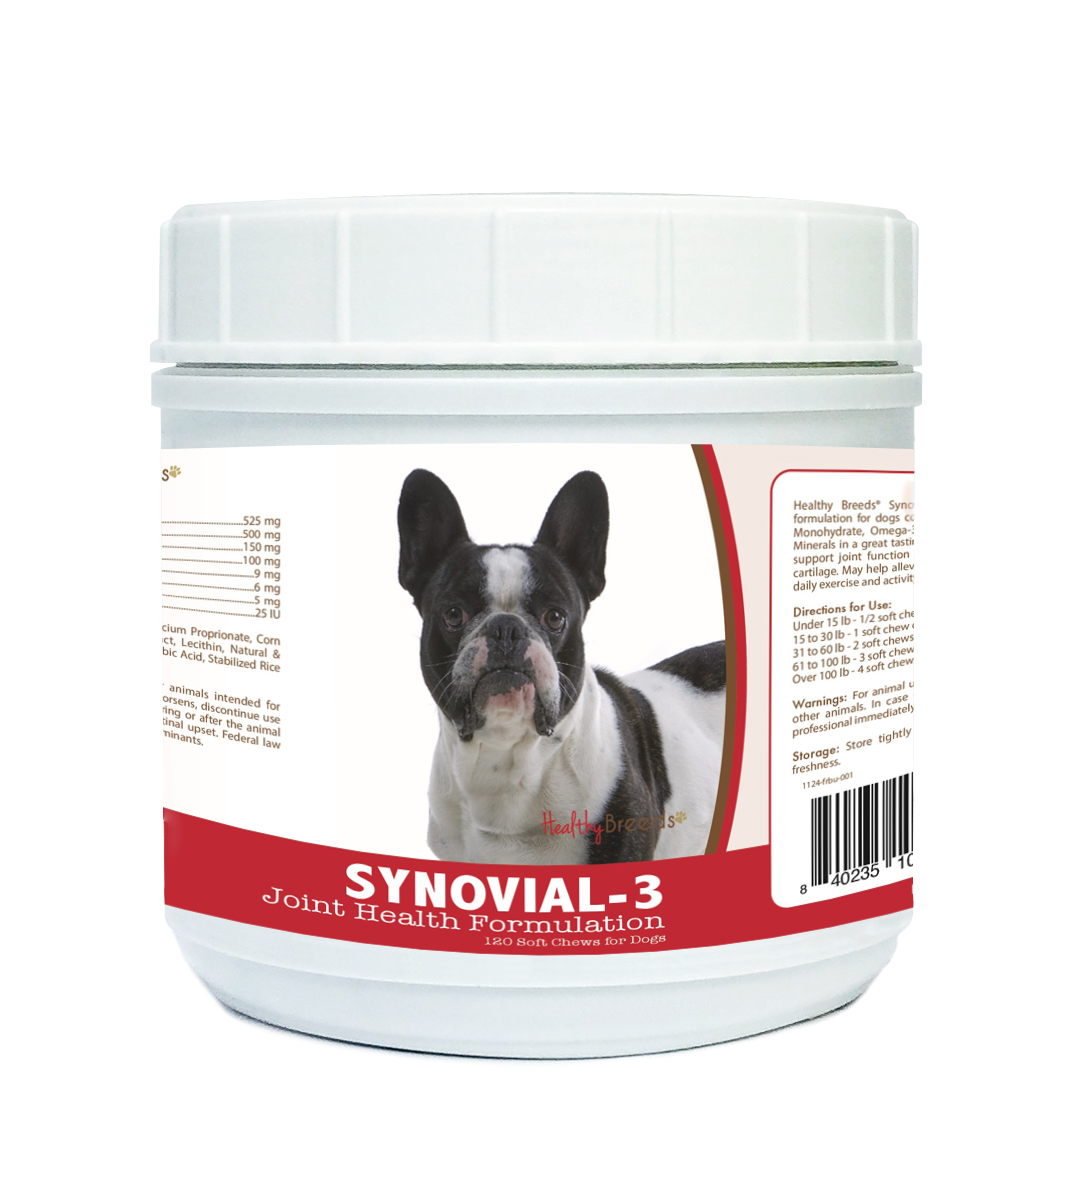 Picture of Healthy Breeds 840235107163 French Bulldog Synovial-3 Joint Health Formulation - 120 count